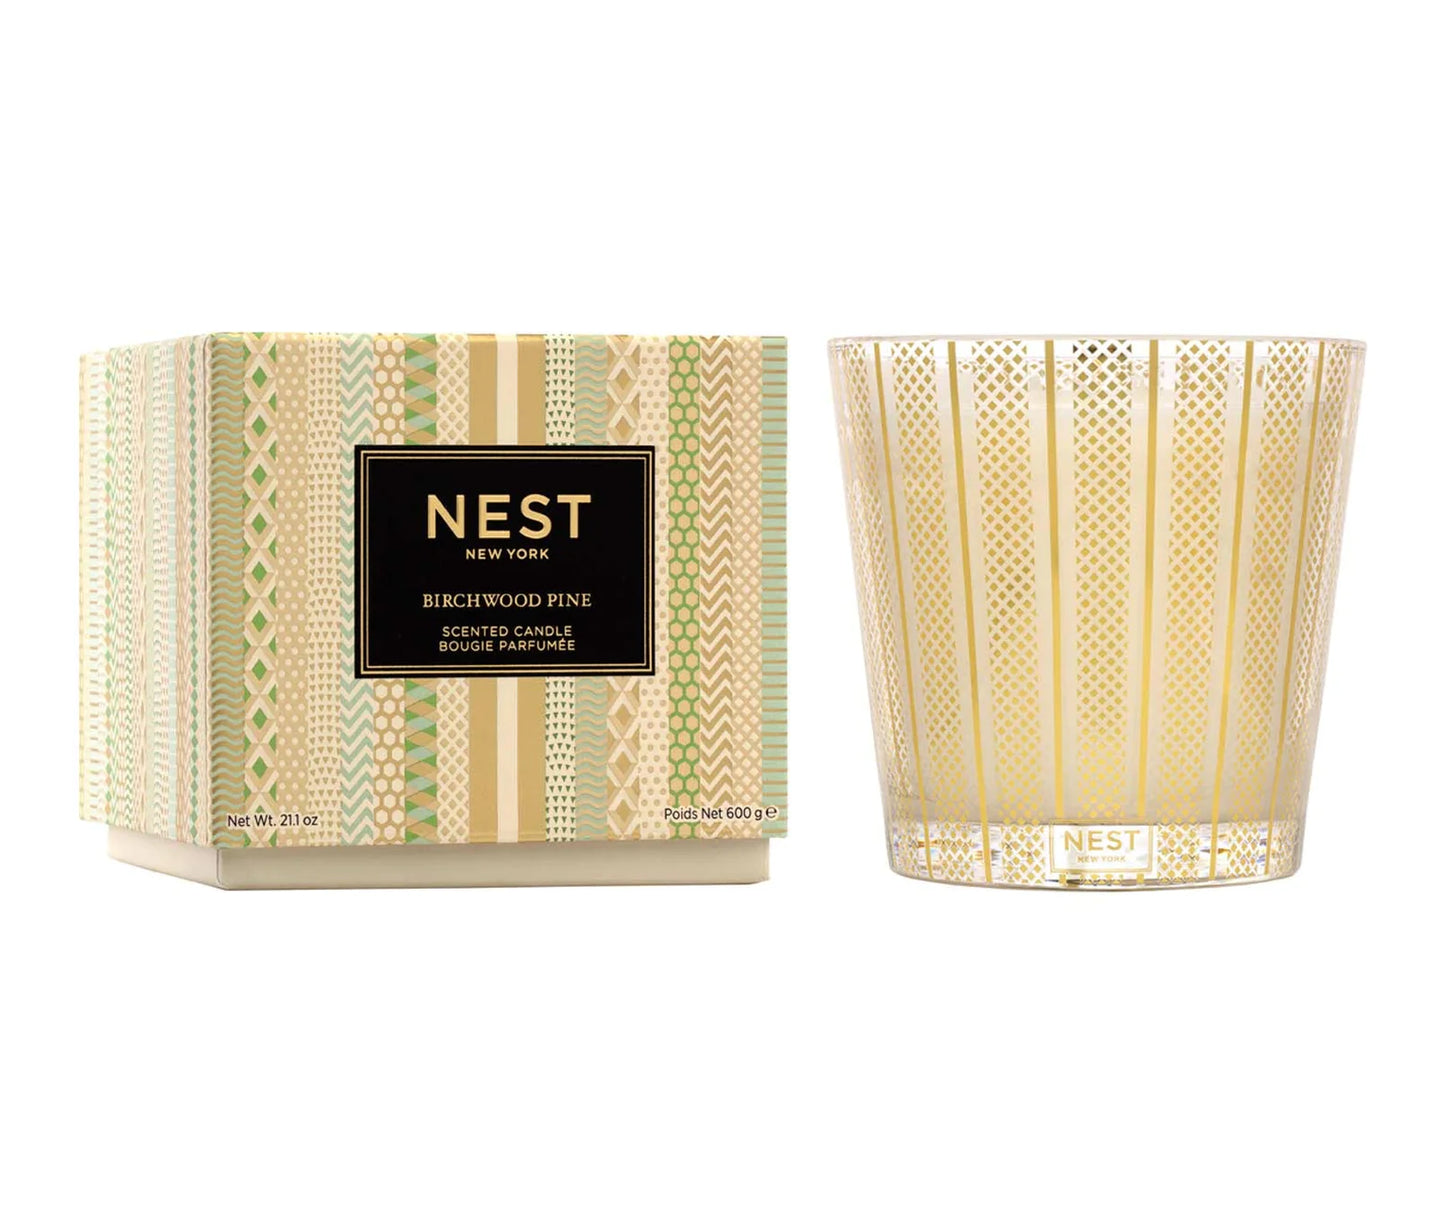 Birchwood Pine 3 Wick Candle from Nest Candles